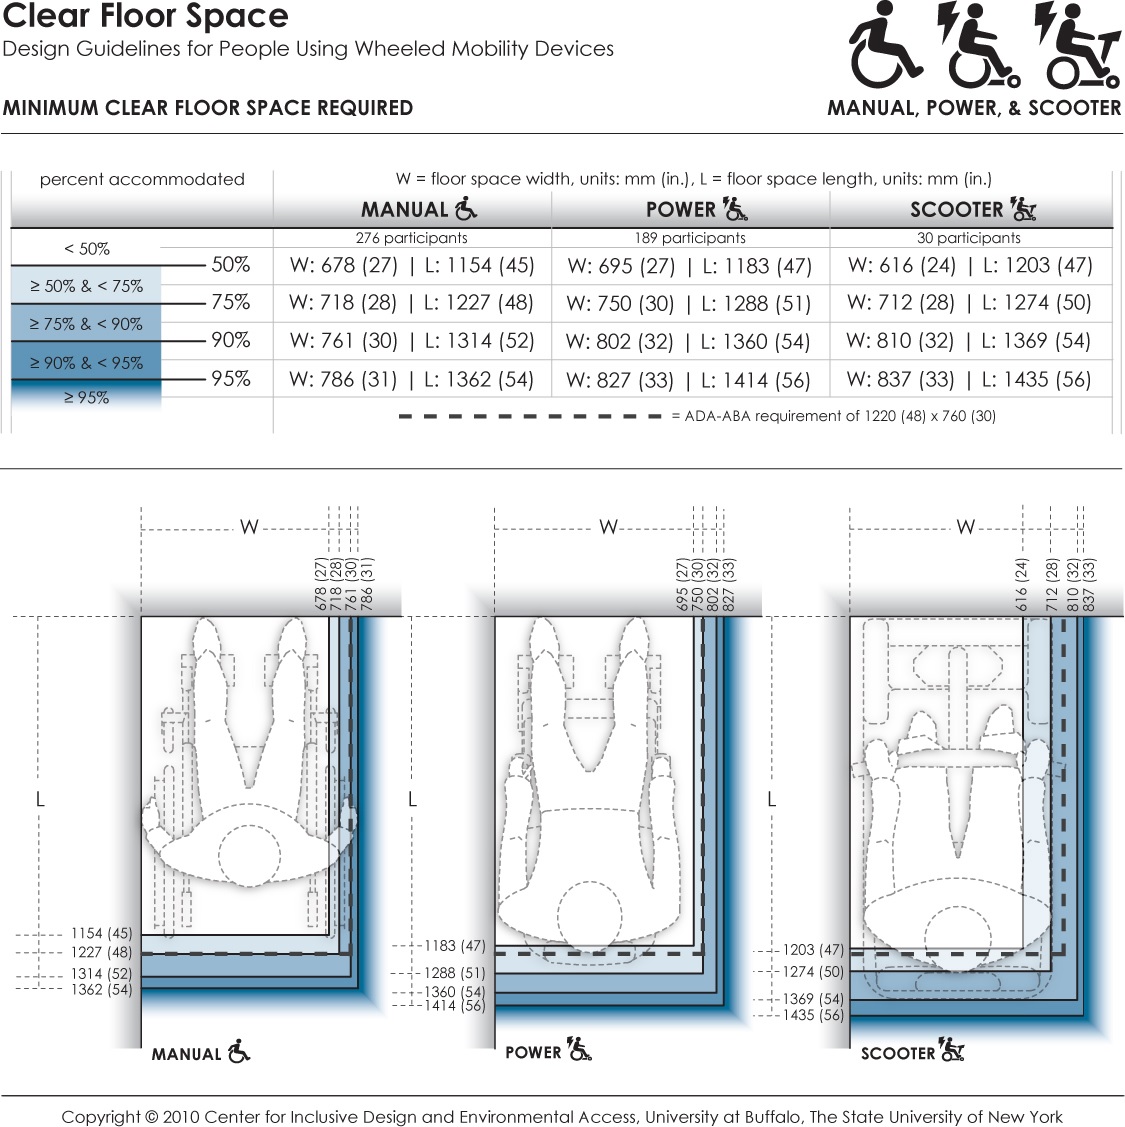 This data provides the minimum dimensions for the rectangular floor area required by occupied wheeled mobility devices (i.e., with the occupant seated in their own wheeled mobility device) when stationary. Clear floor area dimensions are used for determining the size of spaces designated for wheeled mobility users (such as on buses, in movie theaters, sports stadiums). The clear floor area width dimension also informs the minimum clearance width for successful passage through corridors, doorways, and wheelchair ramps. Currently, the ADA accessibility guidelines prescribe a minimum floor area of 760 x 1220 mm (30 x 48 in.) for wheeled mobility access. Dimensions are based on length and width measurements obtained from occupied wheeled mobility devices as part of the Anthropometry of Wheeled Mobility Study. These data suggest minimum clear floor area dimensions of 786 x 1362 mm (31 x 54 in.) for manual chairs, 827 x 1414 mm (33 x 56 in.) for powered chairs, and 837 x 1435 mm (33 x 56 in.) for scooters when needing to accommodate 95% of users.